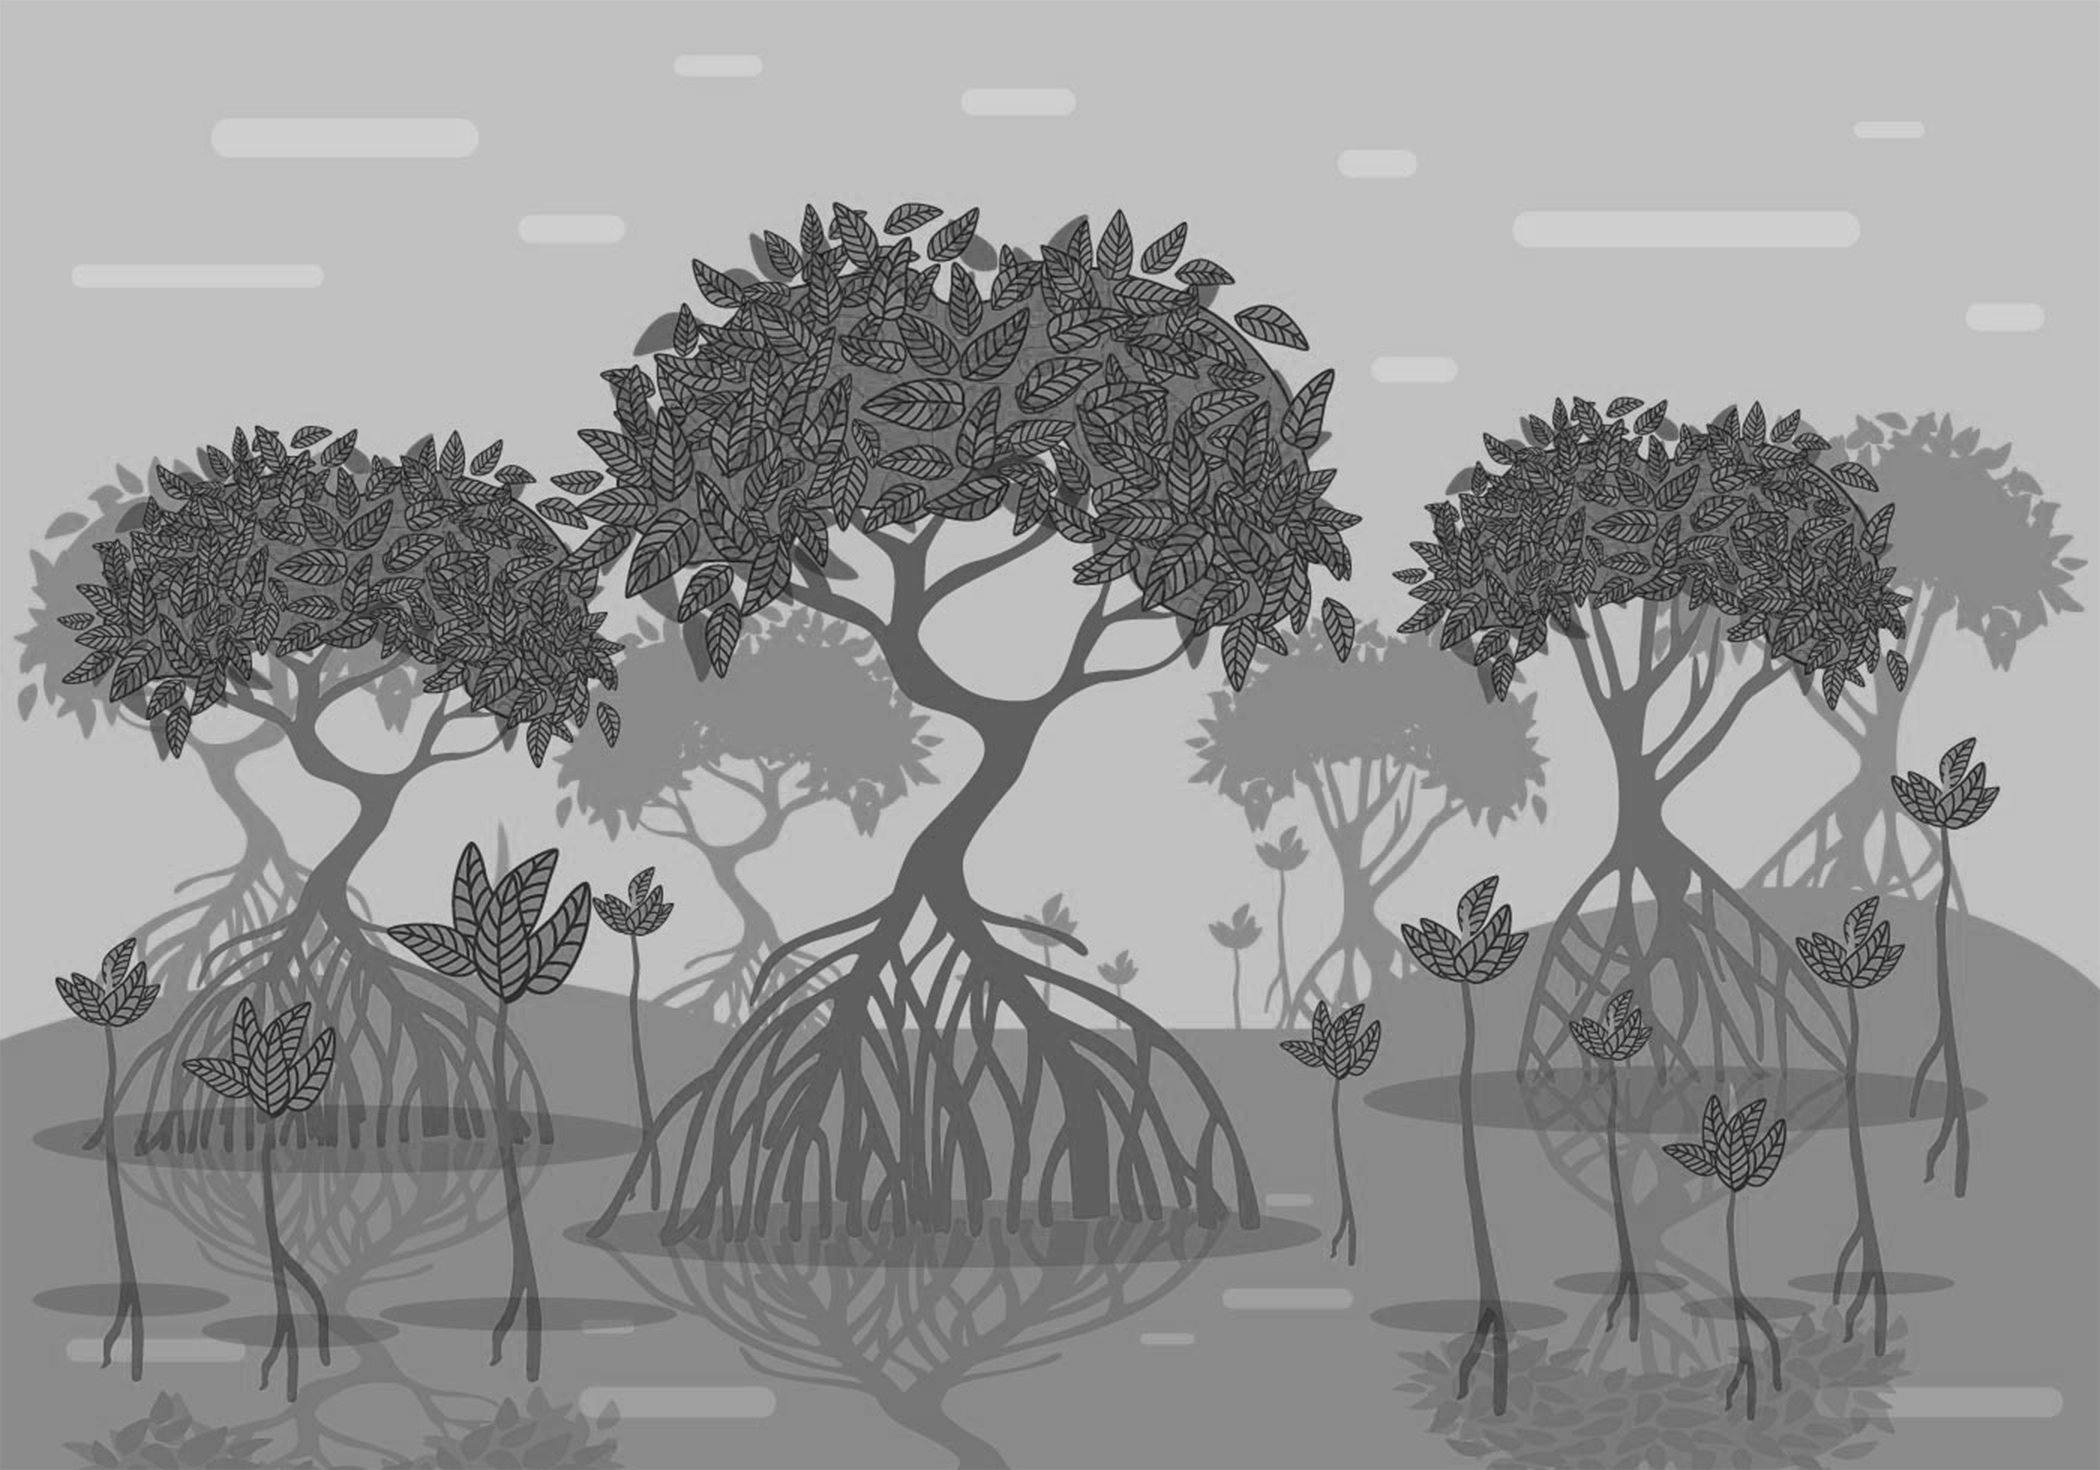 Black and white illustration of a mangrove forest appearing in coastal wetlands